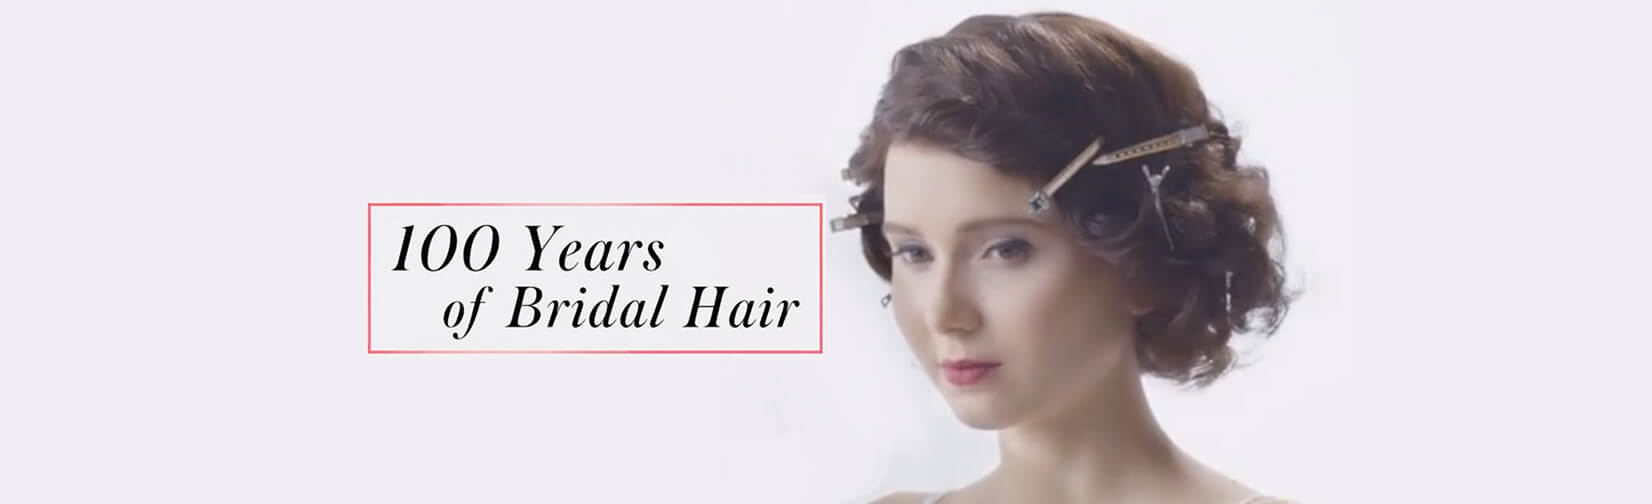 The evolution of wedding hair from 1920 to today